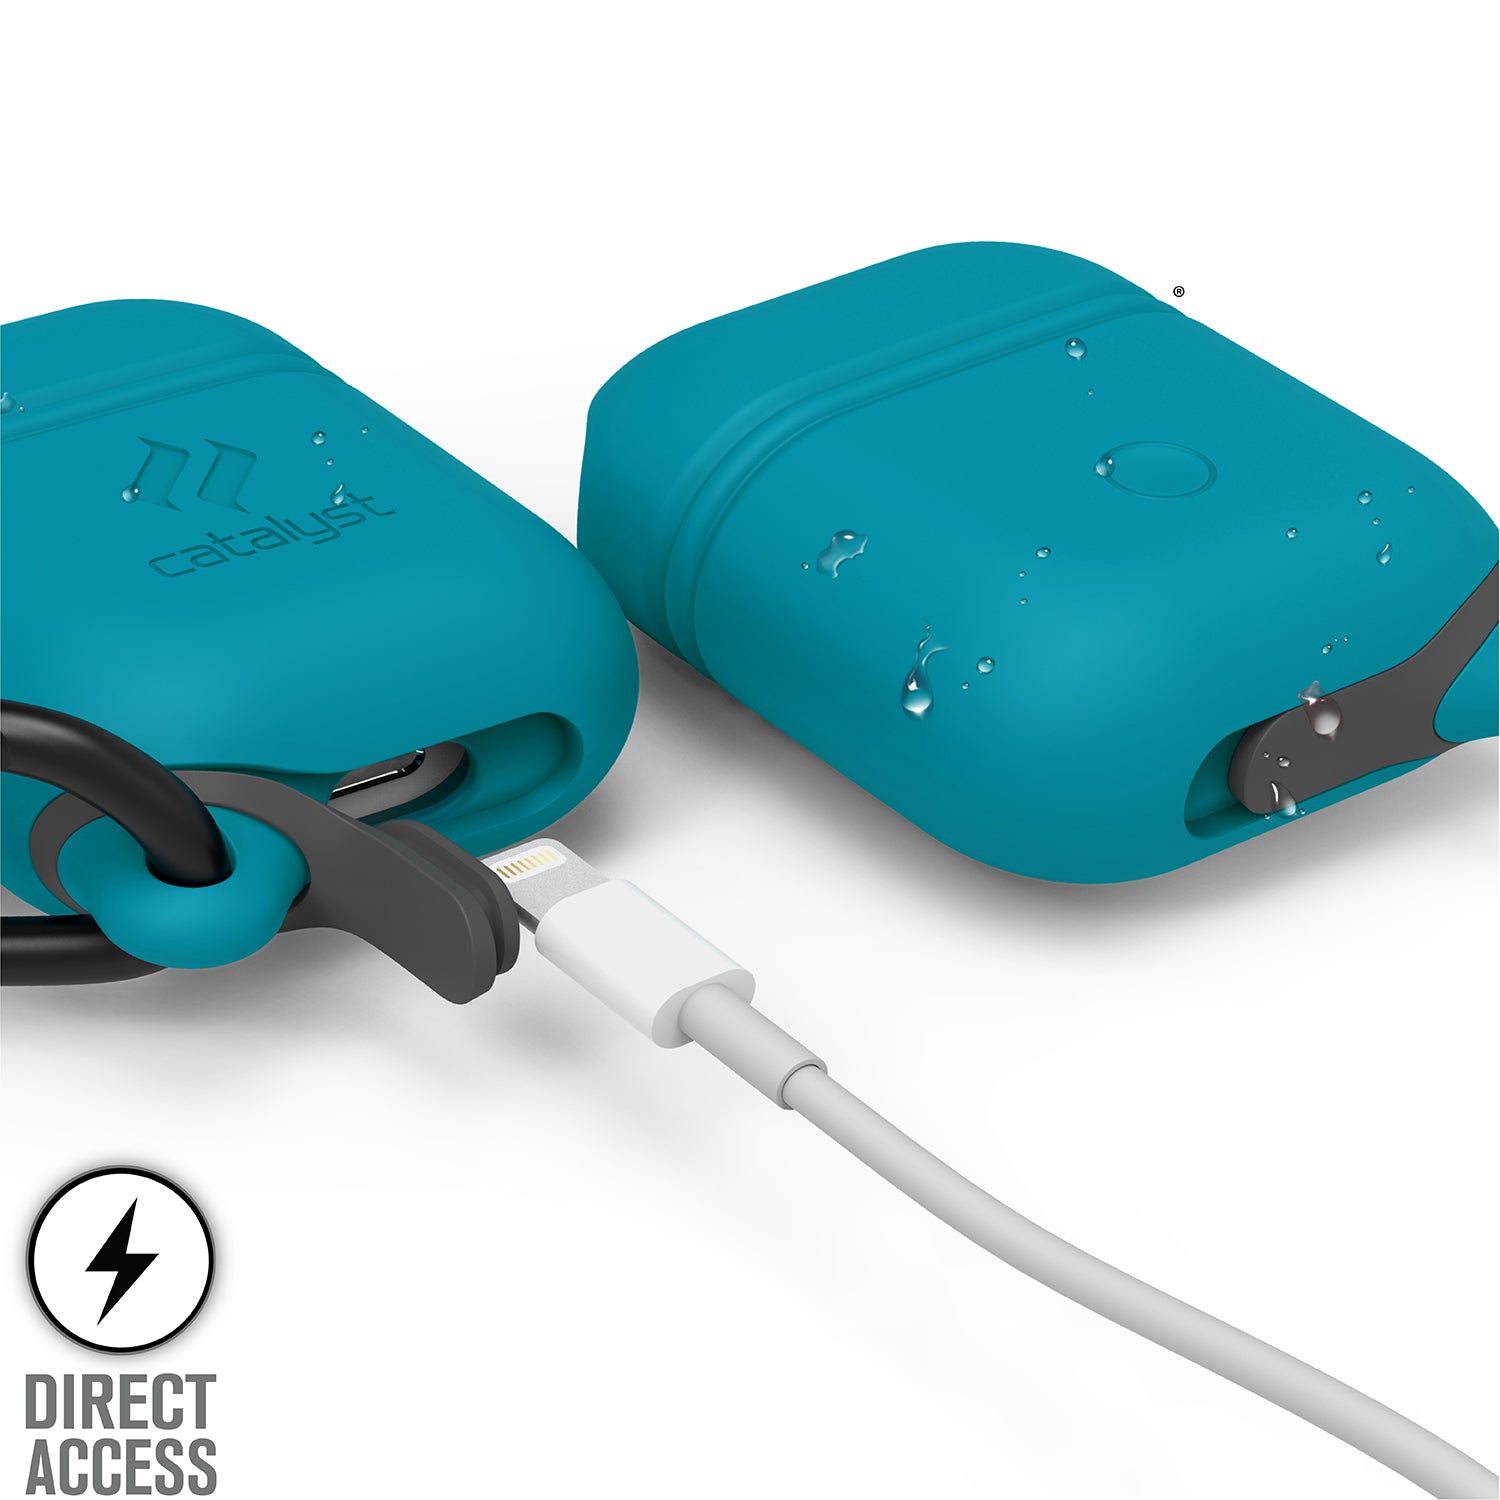 CATAPDTEAL | Catalyst airpods gen2/1 waterproof case + carabiner showing the front and back with lightning port in glacier blue text reads direct access